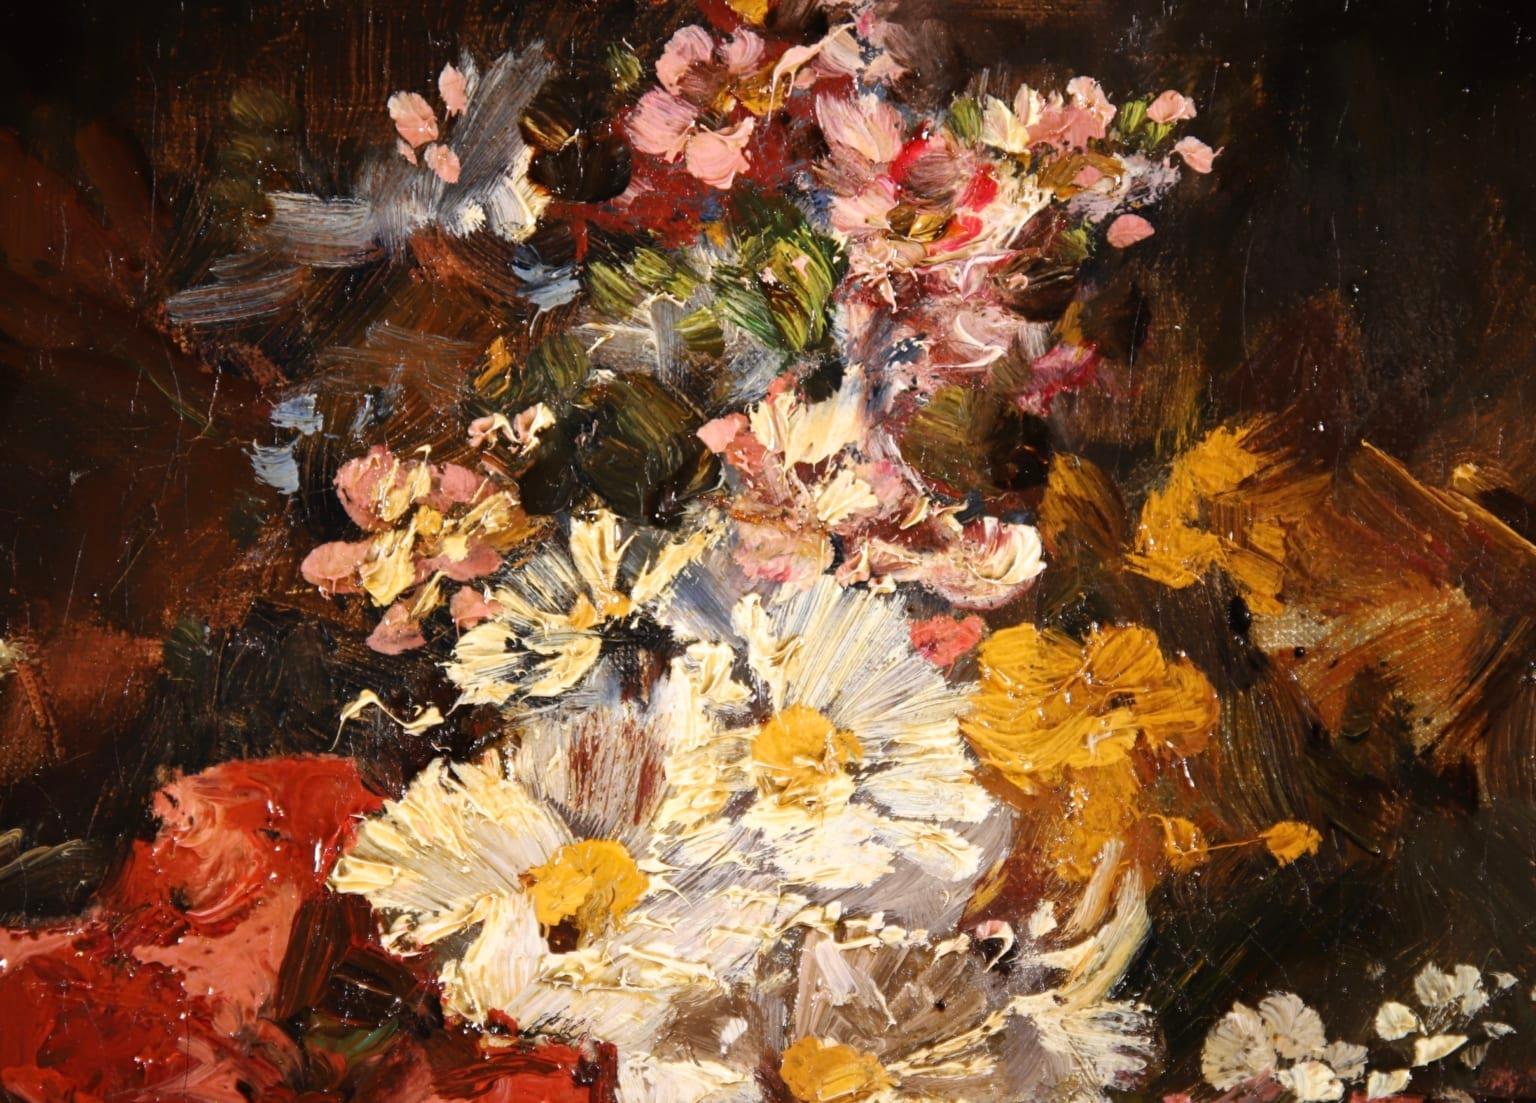 A beautiful oil on canvas circa 1890 by French impressionist painter Georges Jeannin depicting a a vase of flowers including red poppies and white leucanthemum among others wonderfully brushed in the artist's distinct style.

Signature:
Signed lower